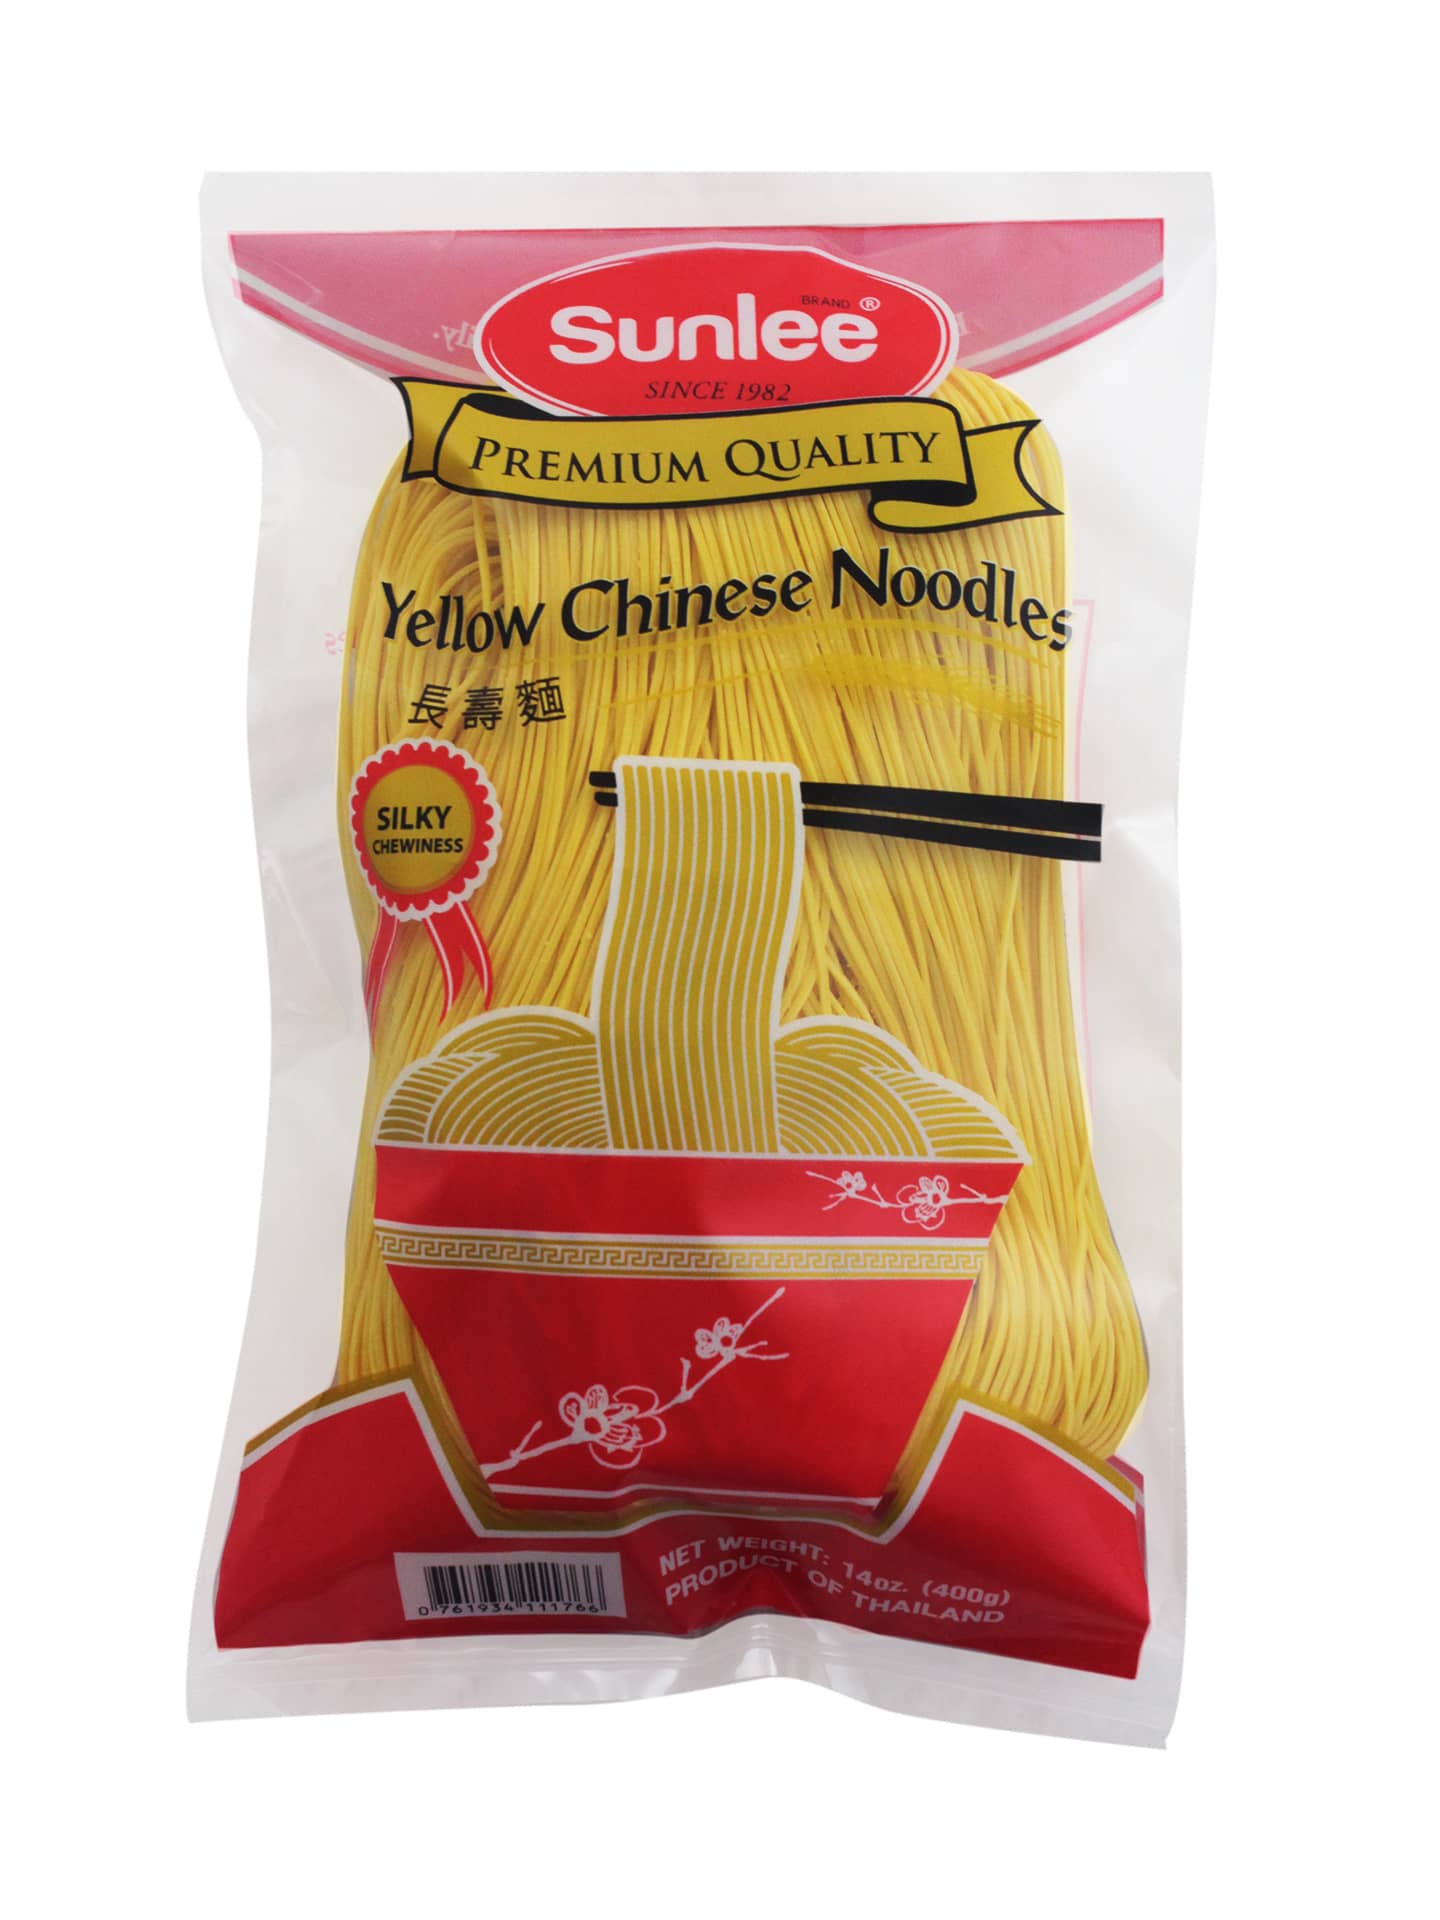 Sunlee - Yellow Chinese Noodles